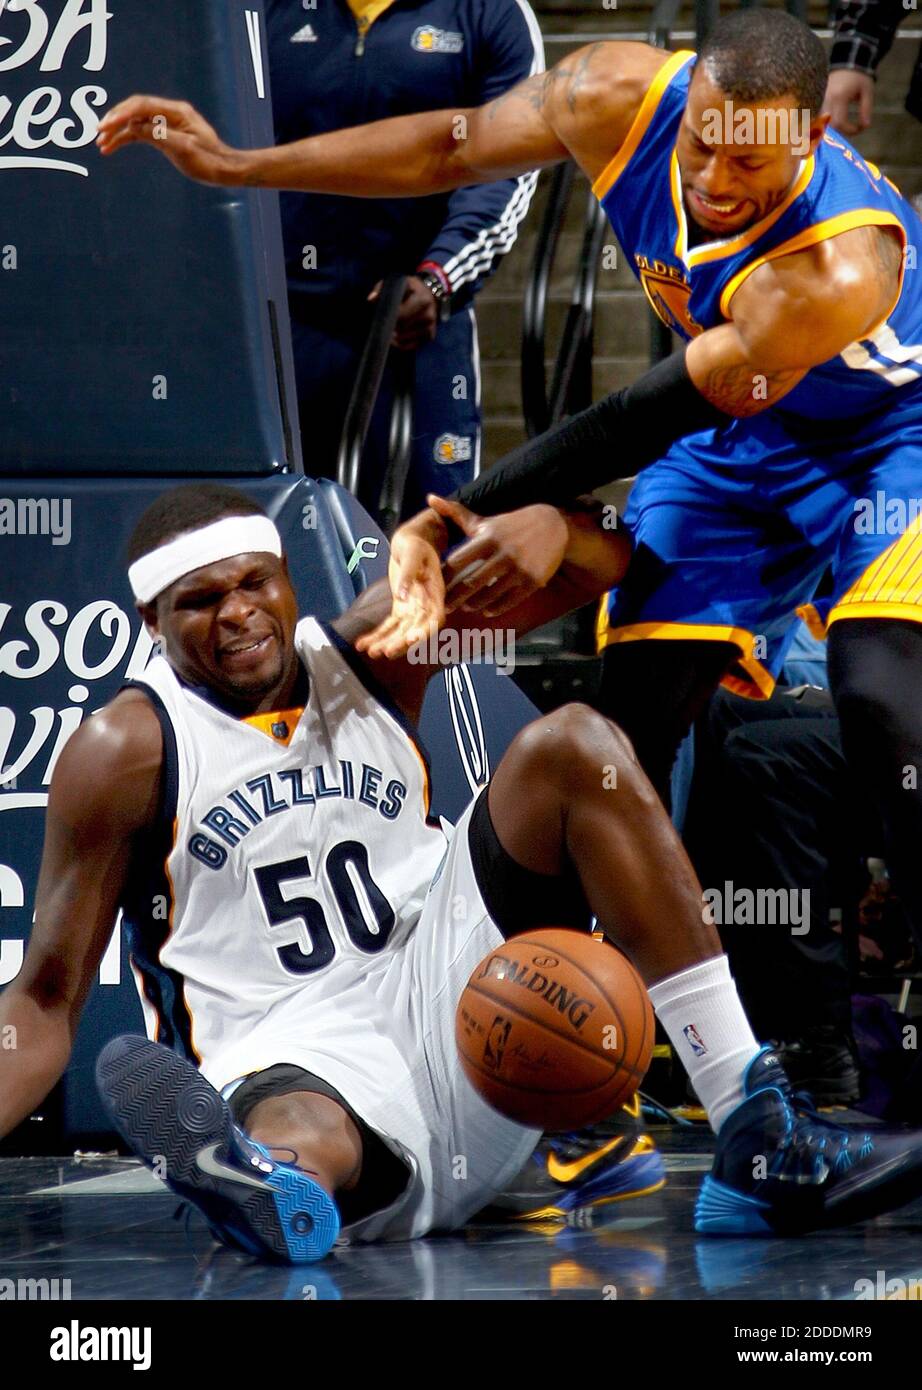 NO FILM, NO VIDEO, NO TV, NO DOCUMENTARY - The Memphis Grizzlies' Zach Randolph (50) tangles with the Golden State Warriors' Andre Iguodala for a loose ball at FedExForum in Memphis, TN, USA on December 16, 2014. The Grizzlies won, 105-98. Photo by Nikki Boertman/The Commercial Appeal/ABACAPRESS.COM Stock Photo